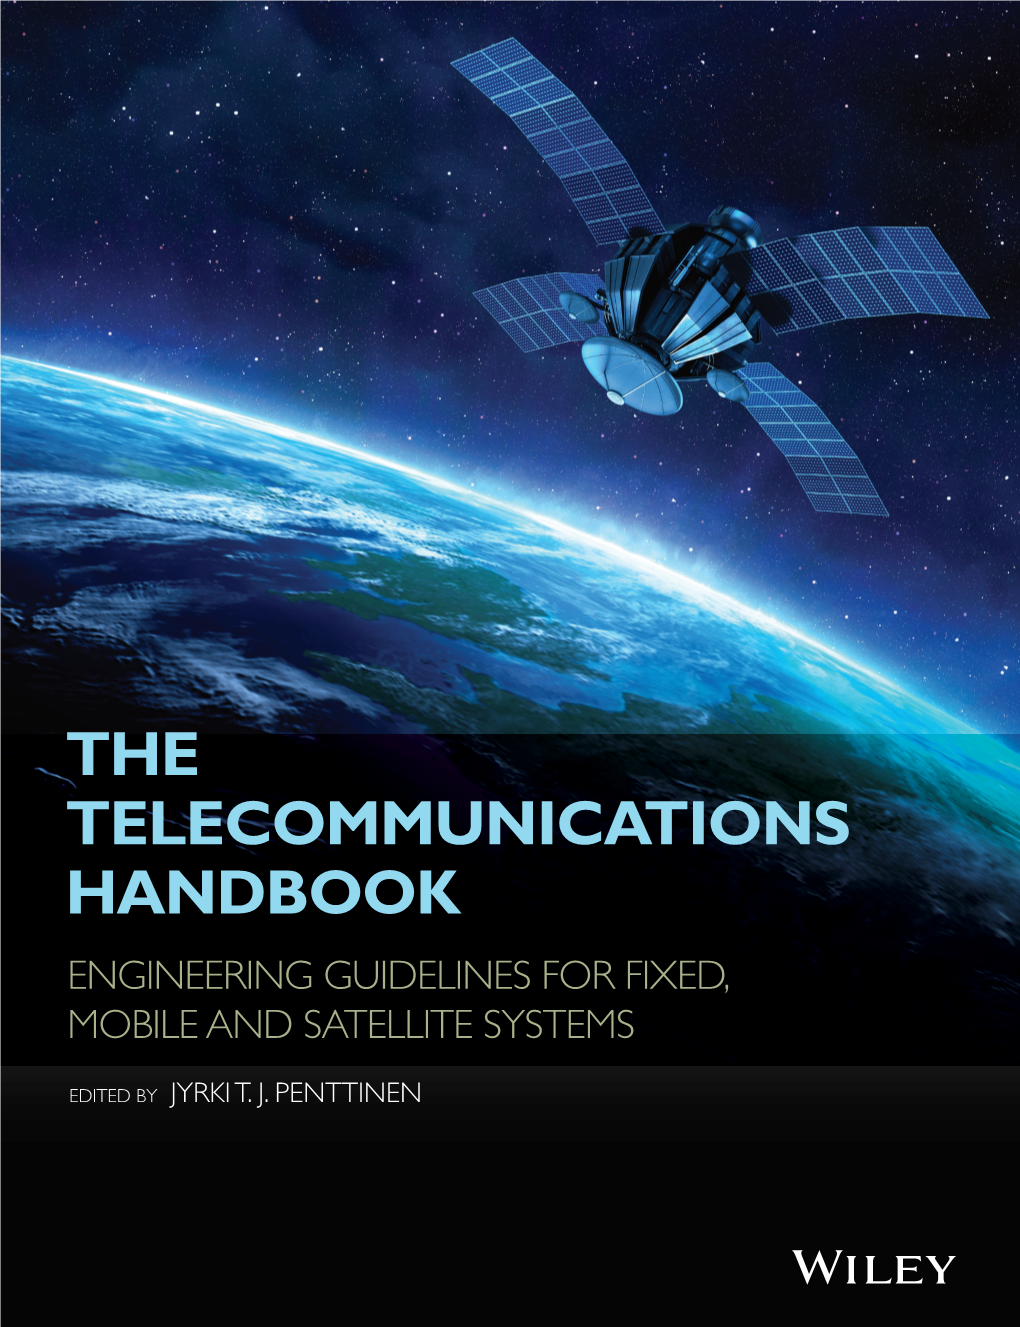 The Telecommunications Handbook: Engineering Guidelines for Fixed